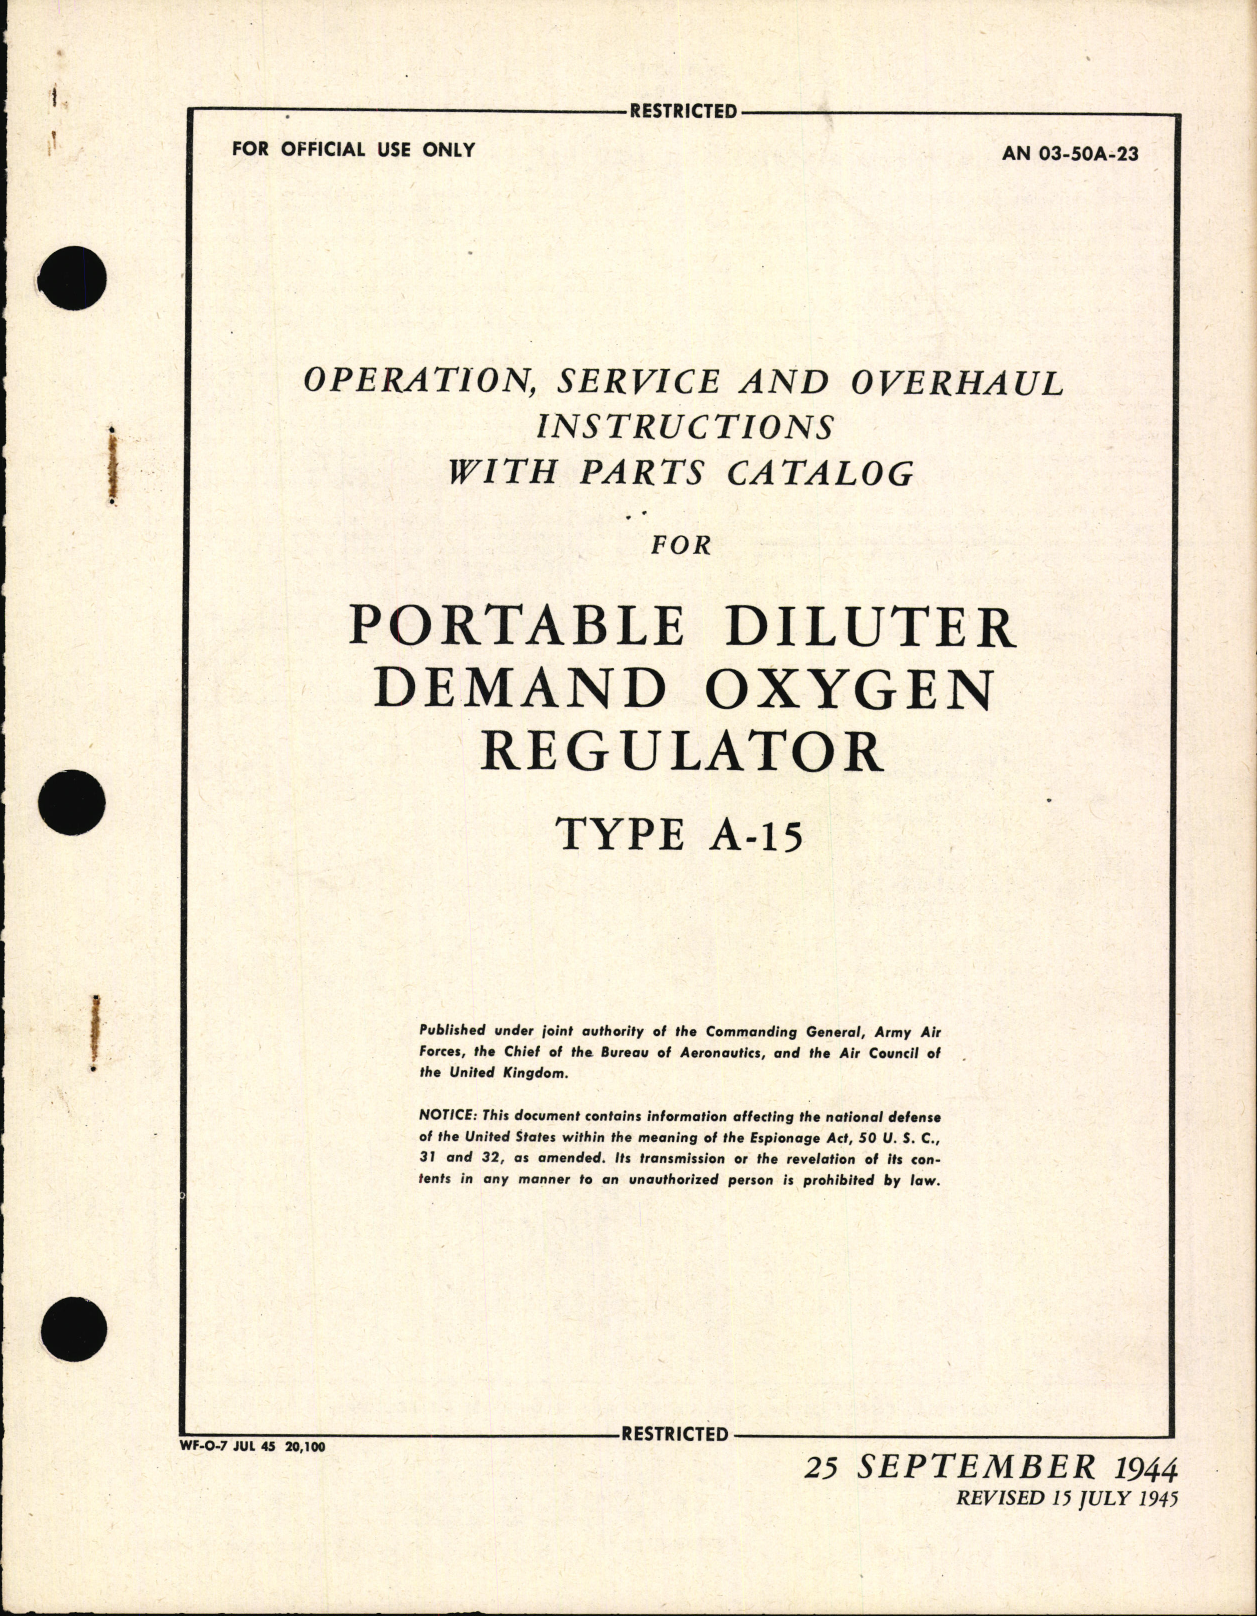 Sample page 1 from AirCorps Library document: Operation, Service and Overhaul Instructions for Portable Diluter Demand Oxygen Regulator Type A-15